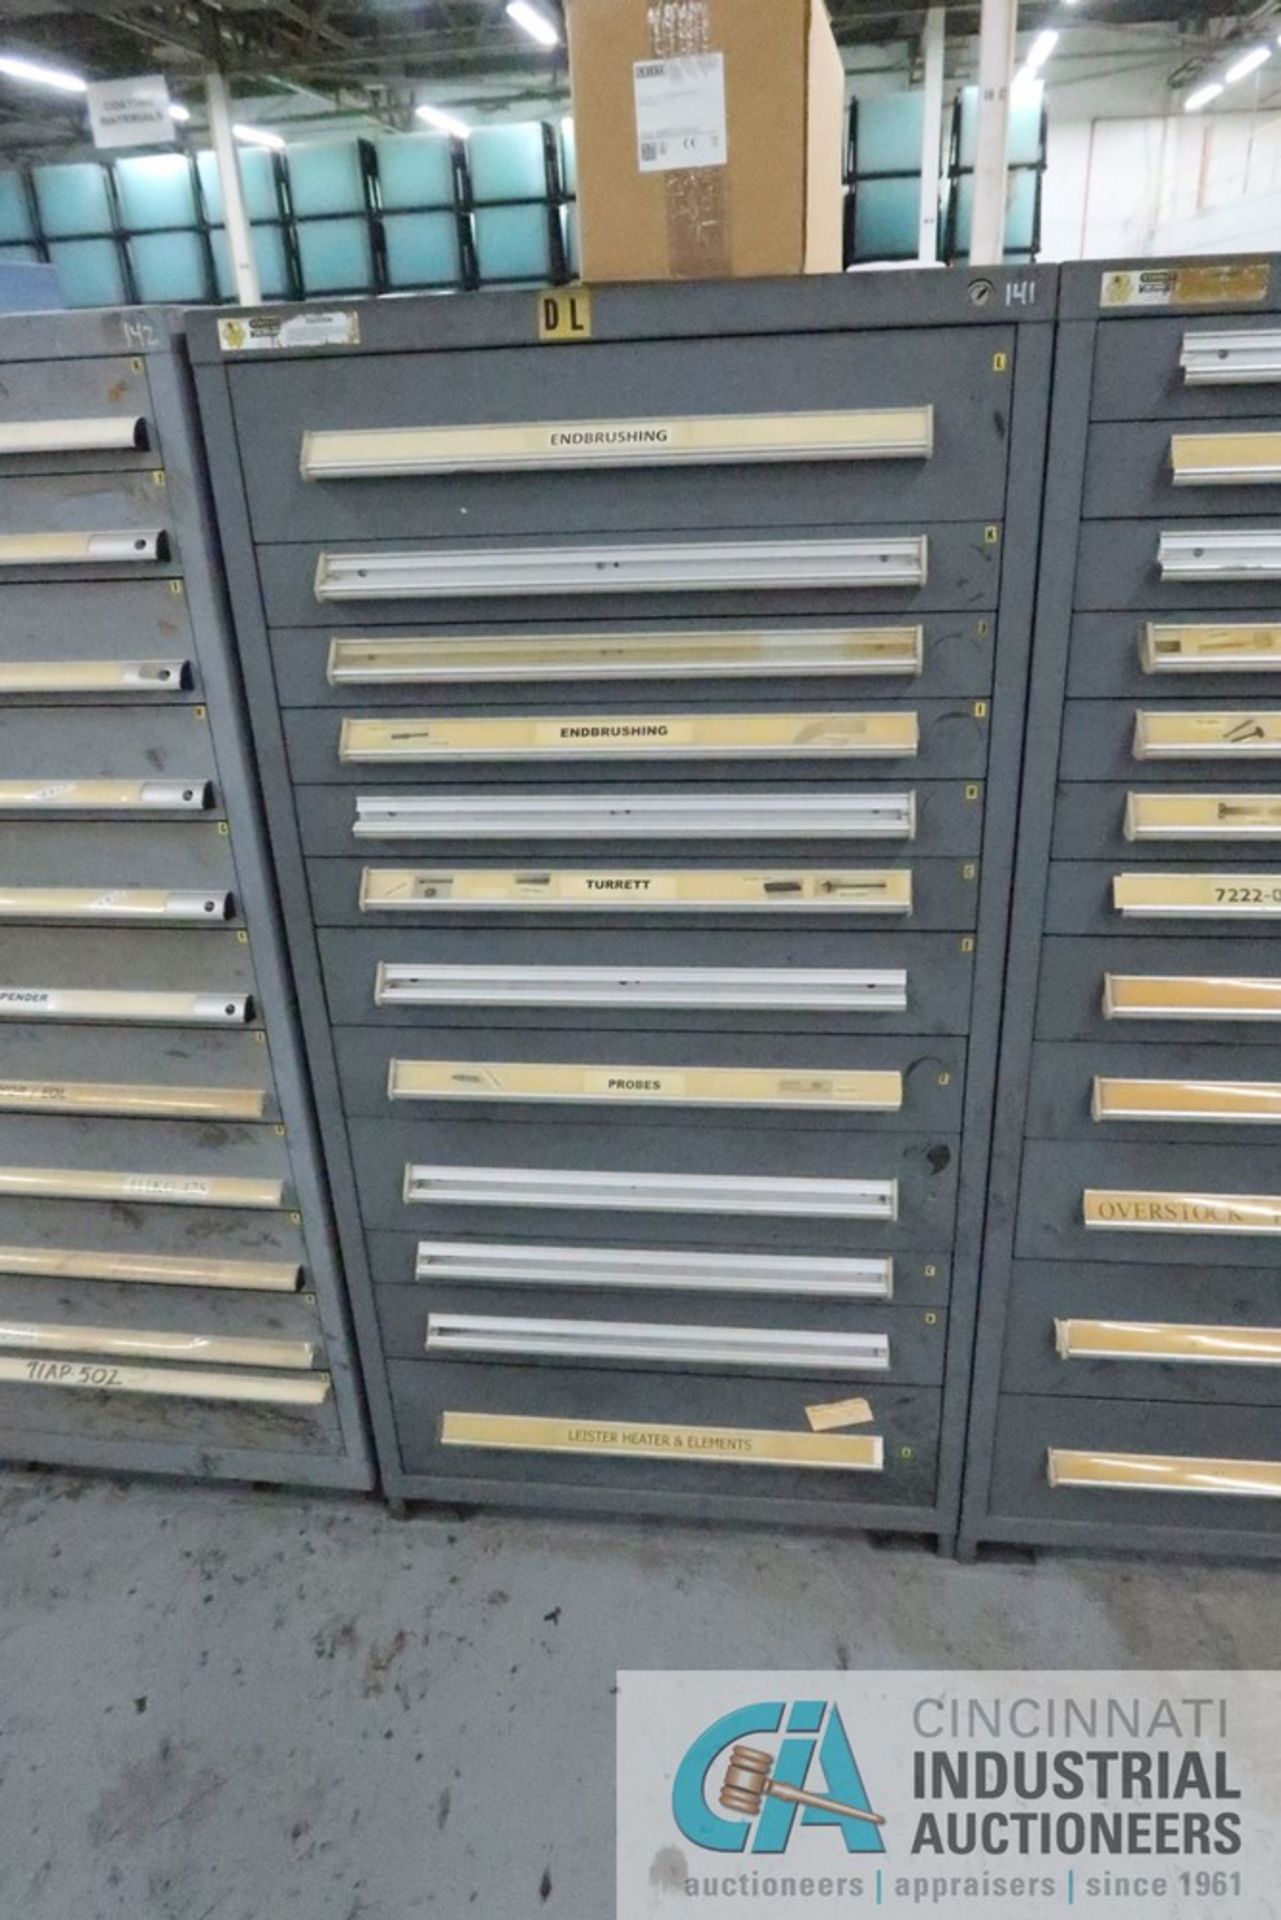 12-DRAWER VIDMAR CABINET WITH CONTENTS INCLUDING MISCELLANEOUS END BUSHING PARTS, TURRET PARTS,